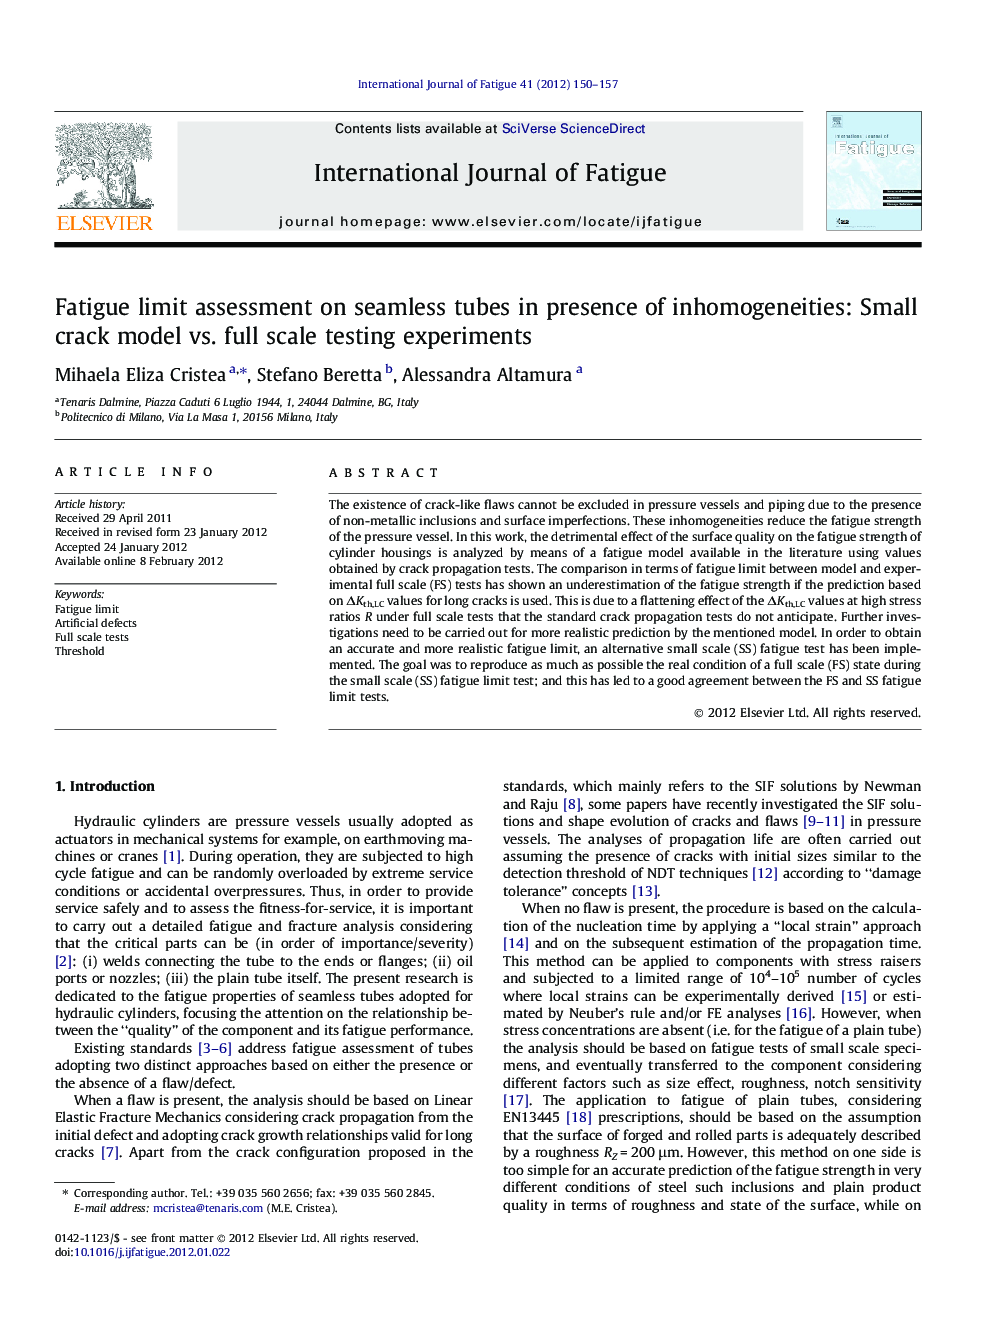 Fatigue limit assessment on seamless tubes in presence of inhomogeneities: Small crack model vs. full scale testing experiments